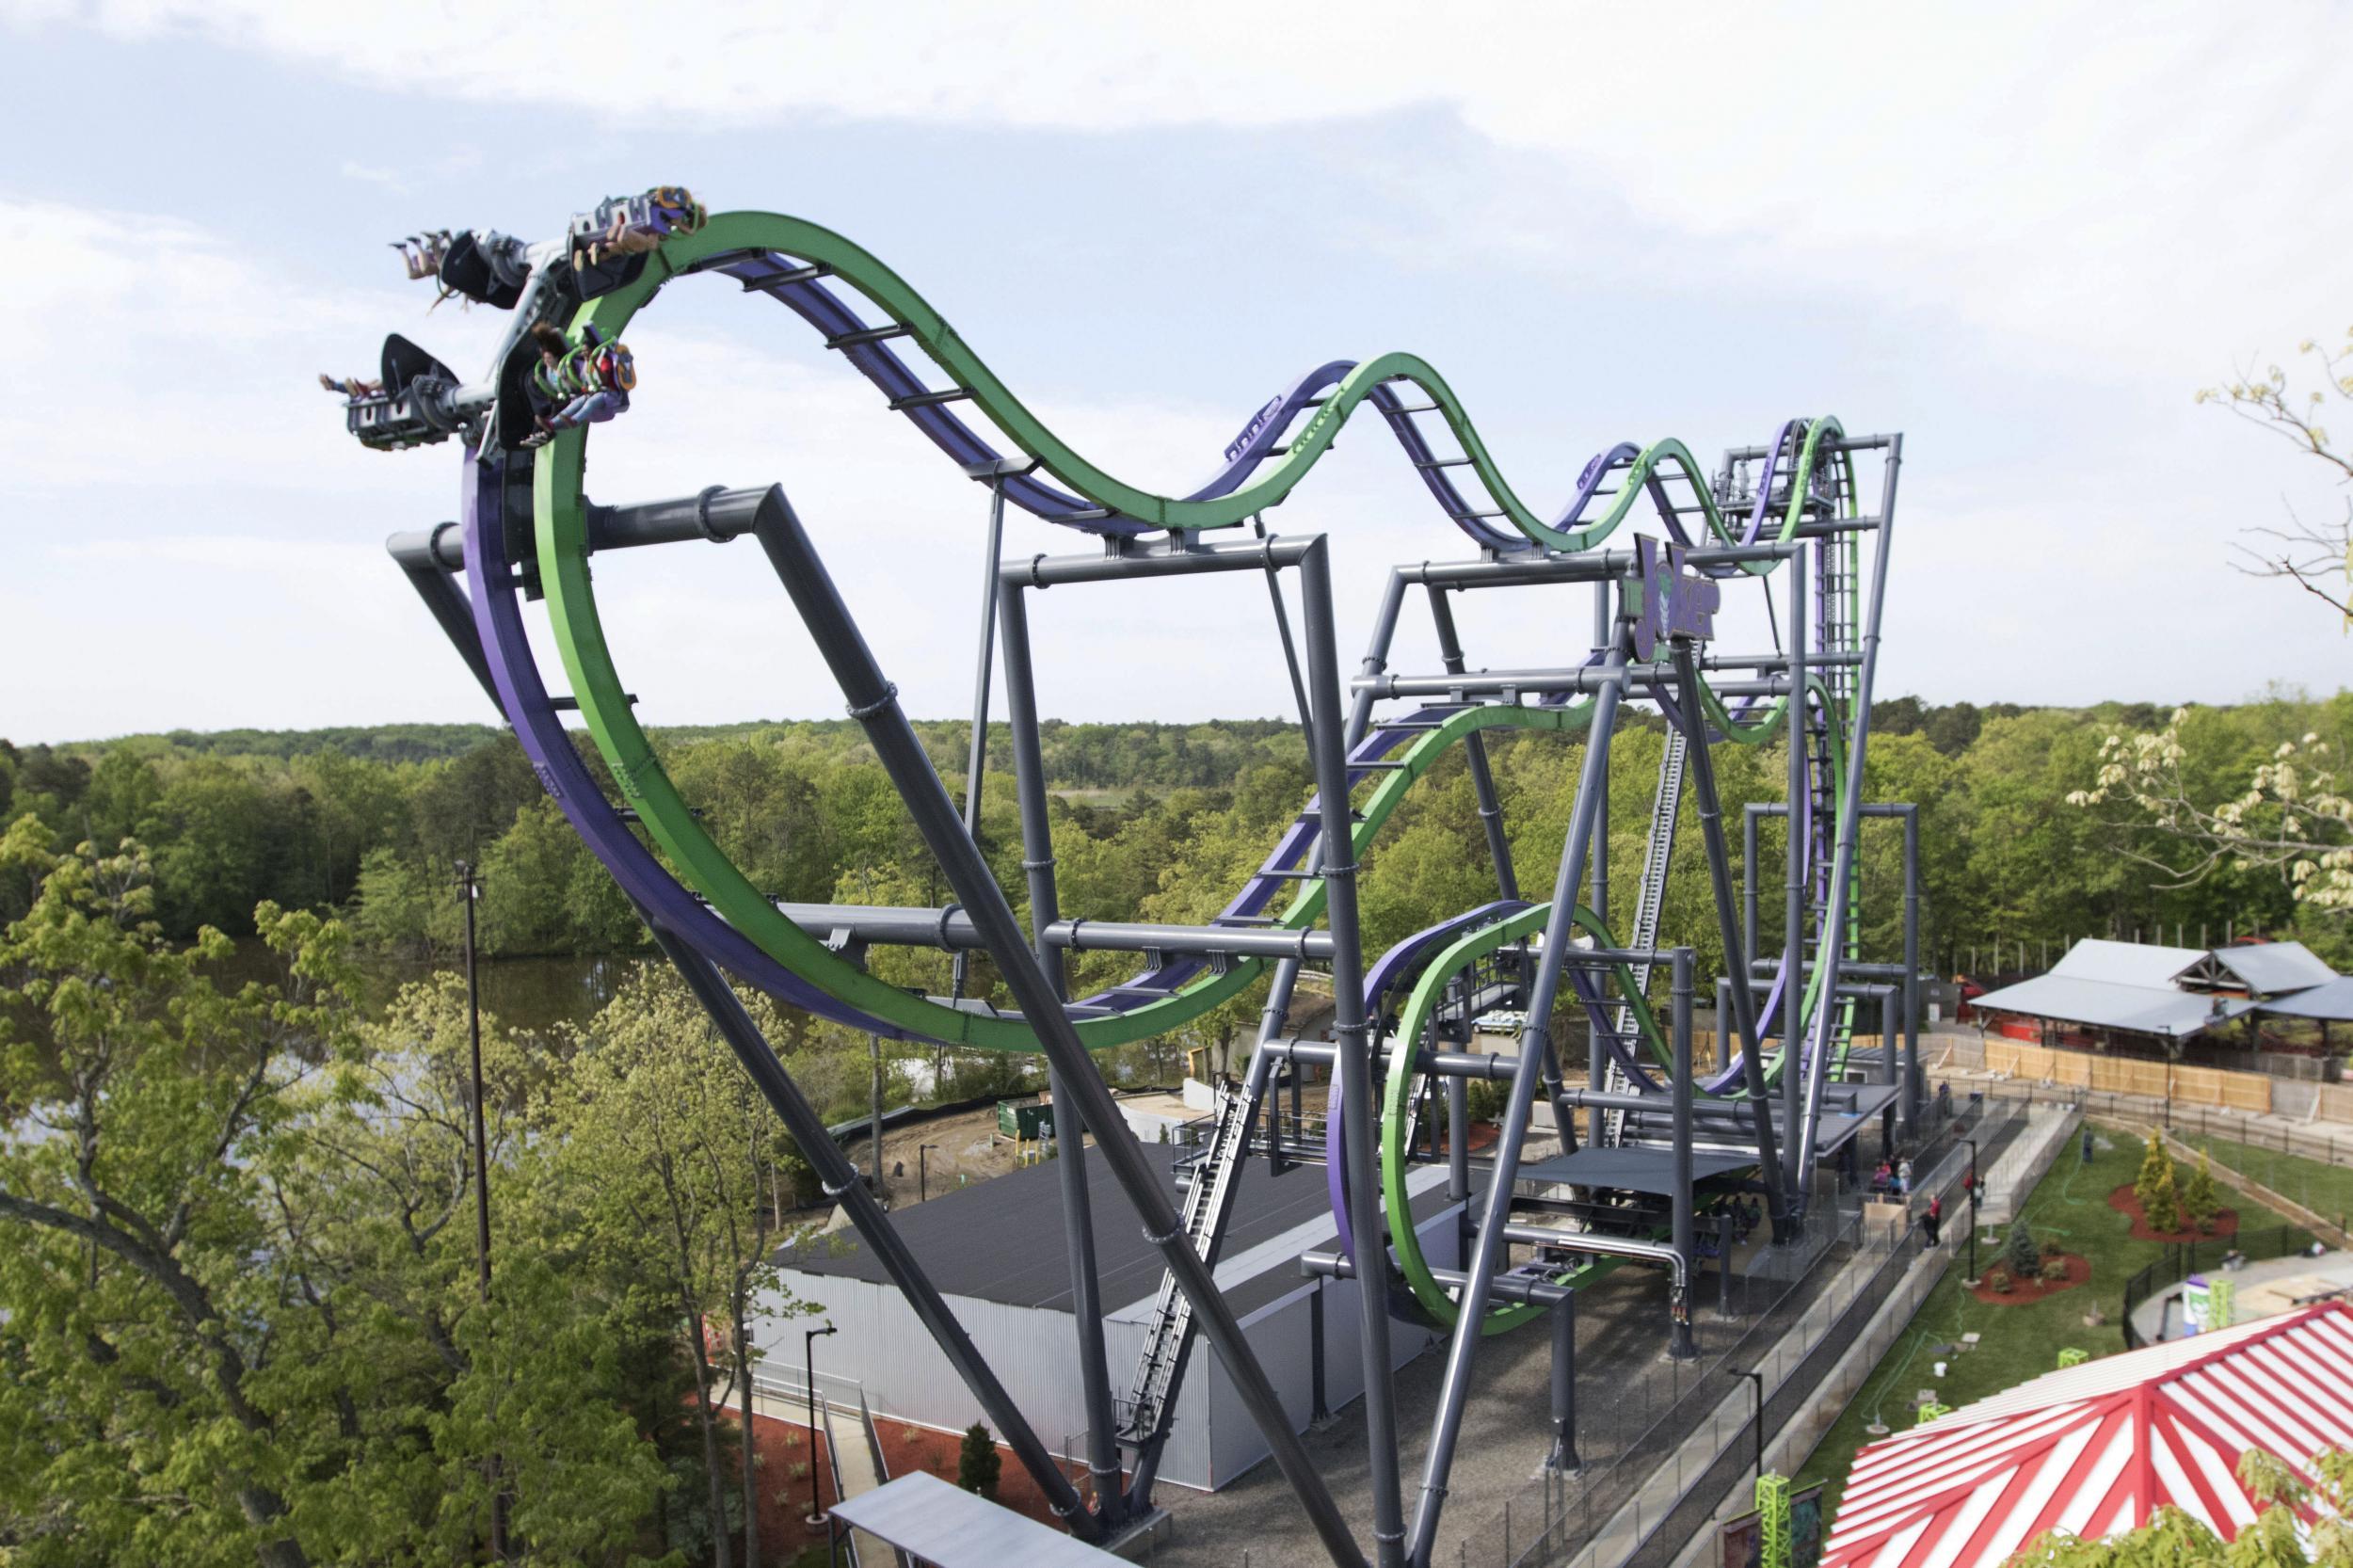 The Joker, the 4D rollercoaster opening later this year